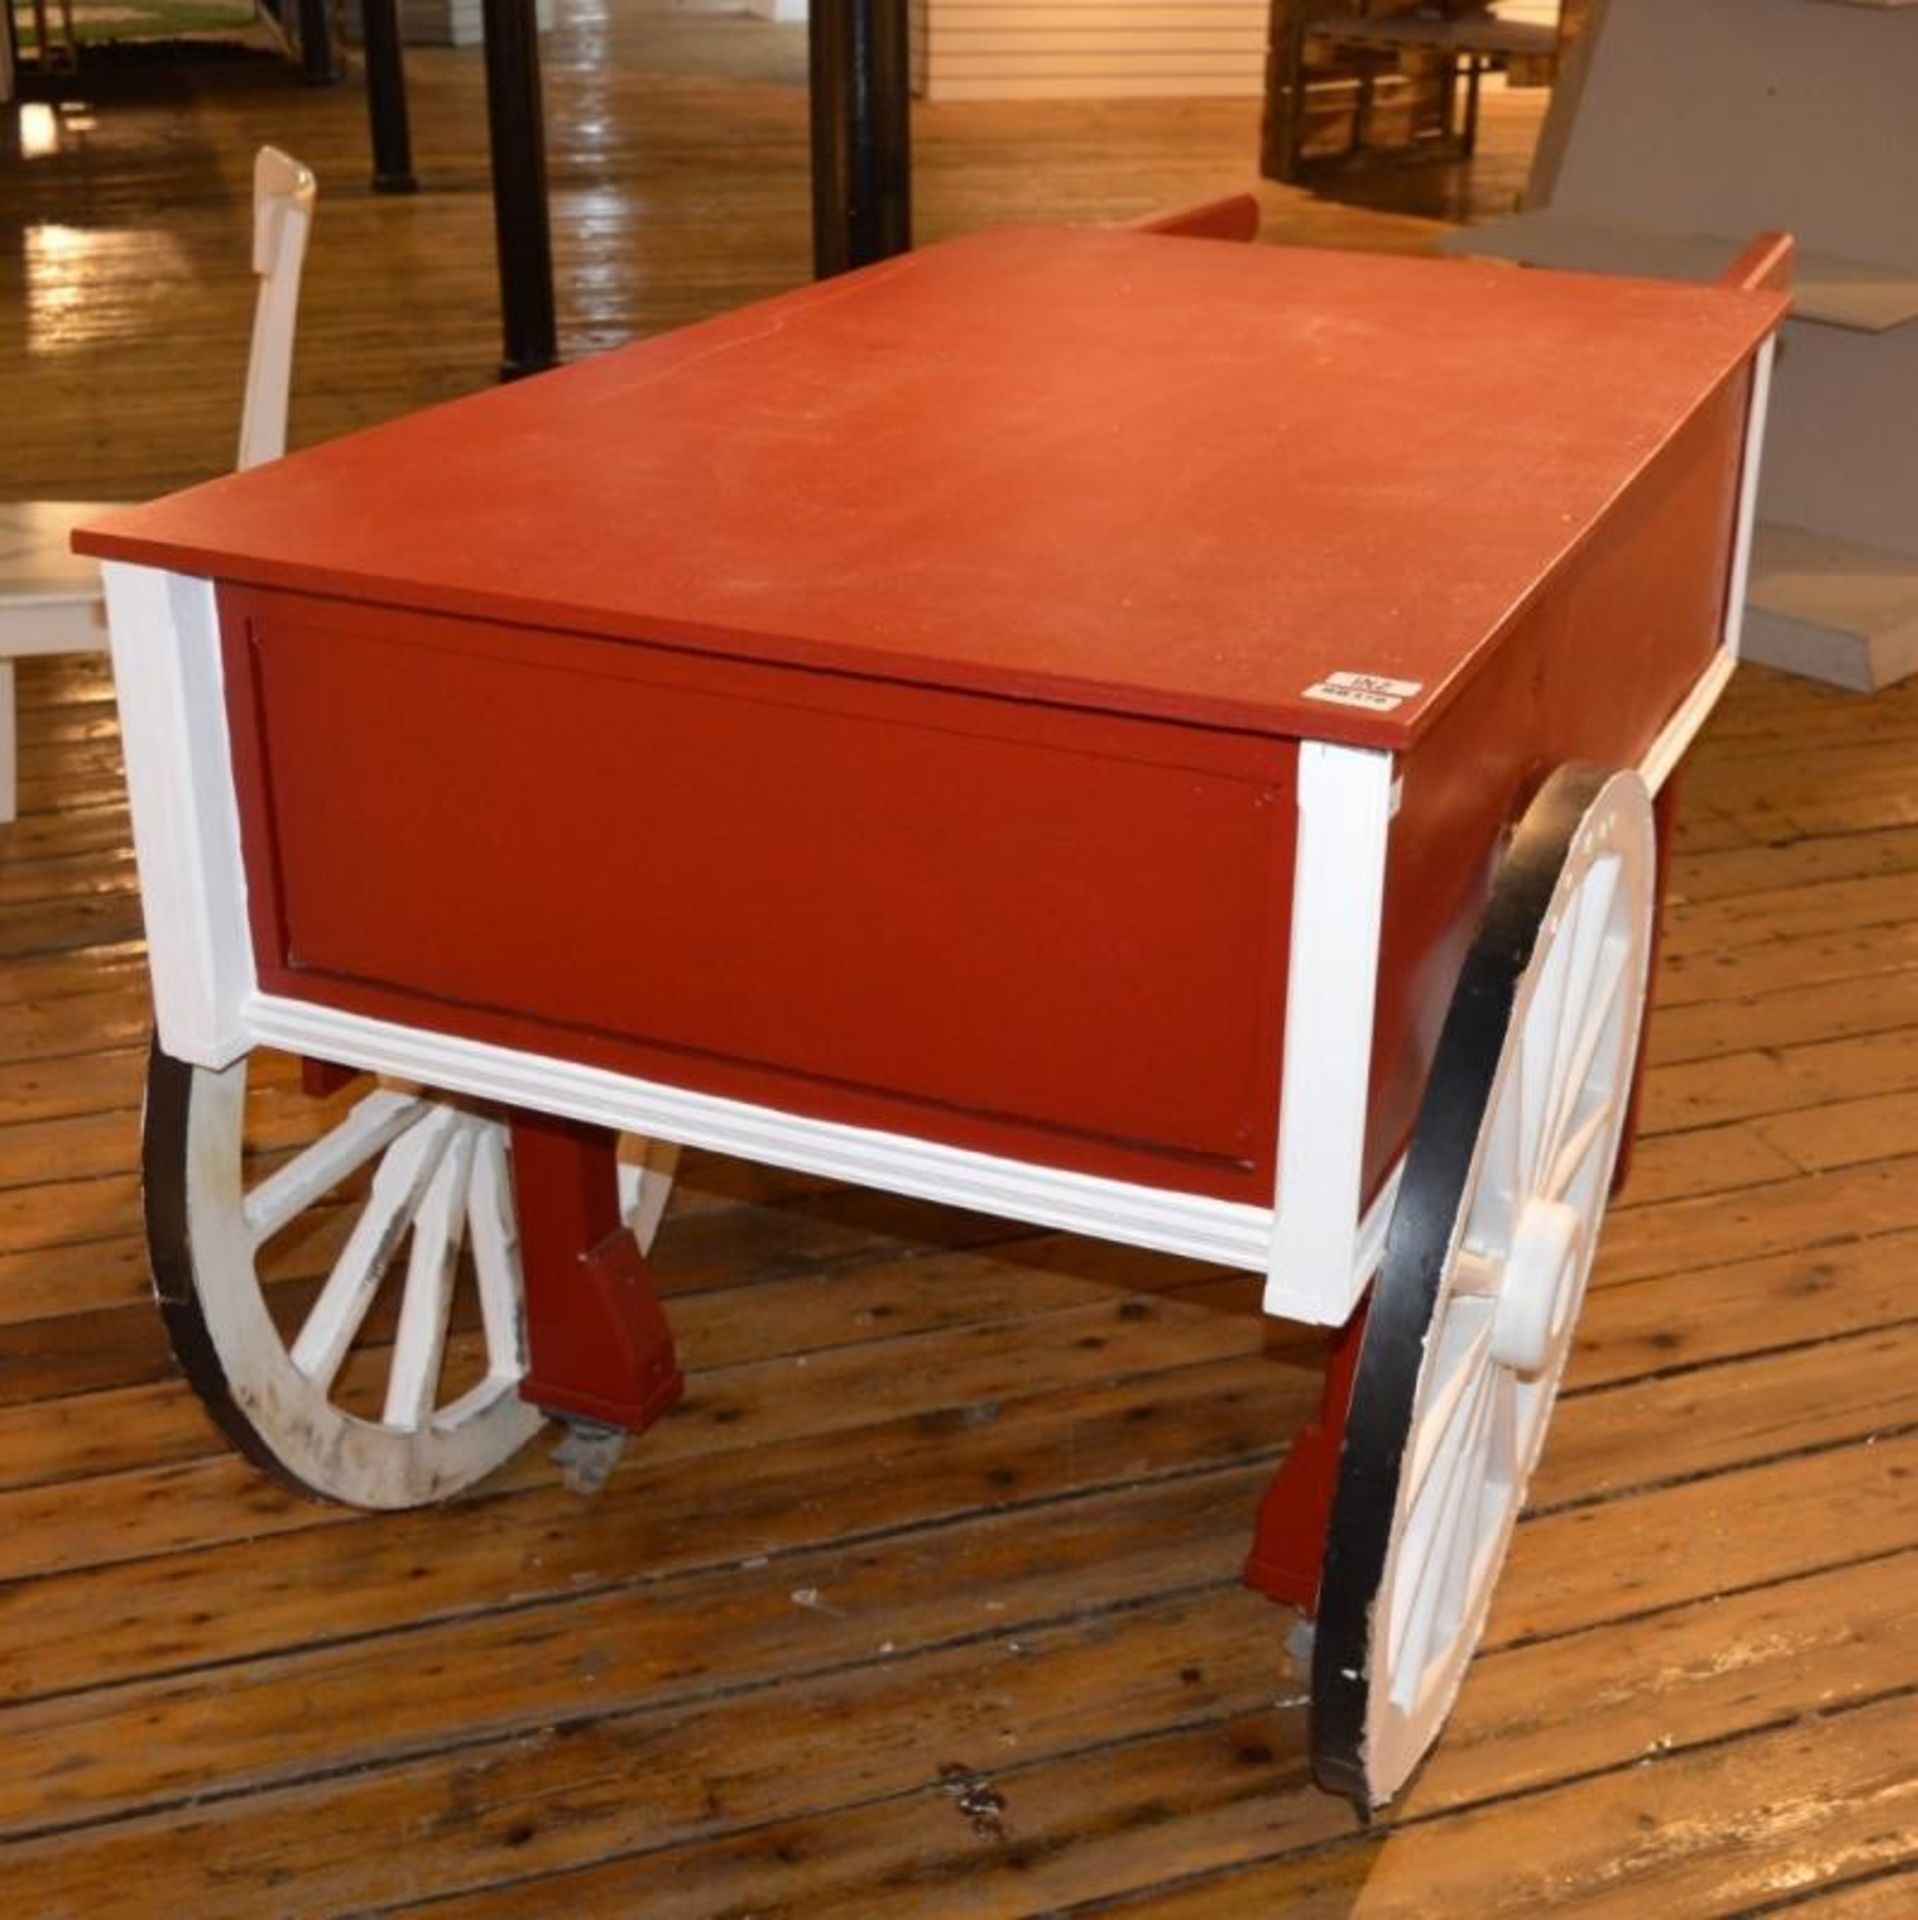 1 x Retail Display Cart in Red - H94 x W95 x D150 (204 with handles) cms - Ref BB376 TF - CL351 - Lo - Image 2 of 5